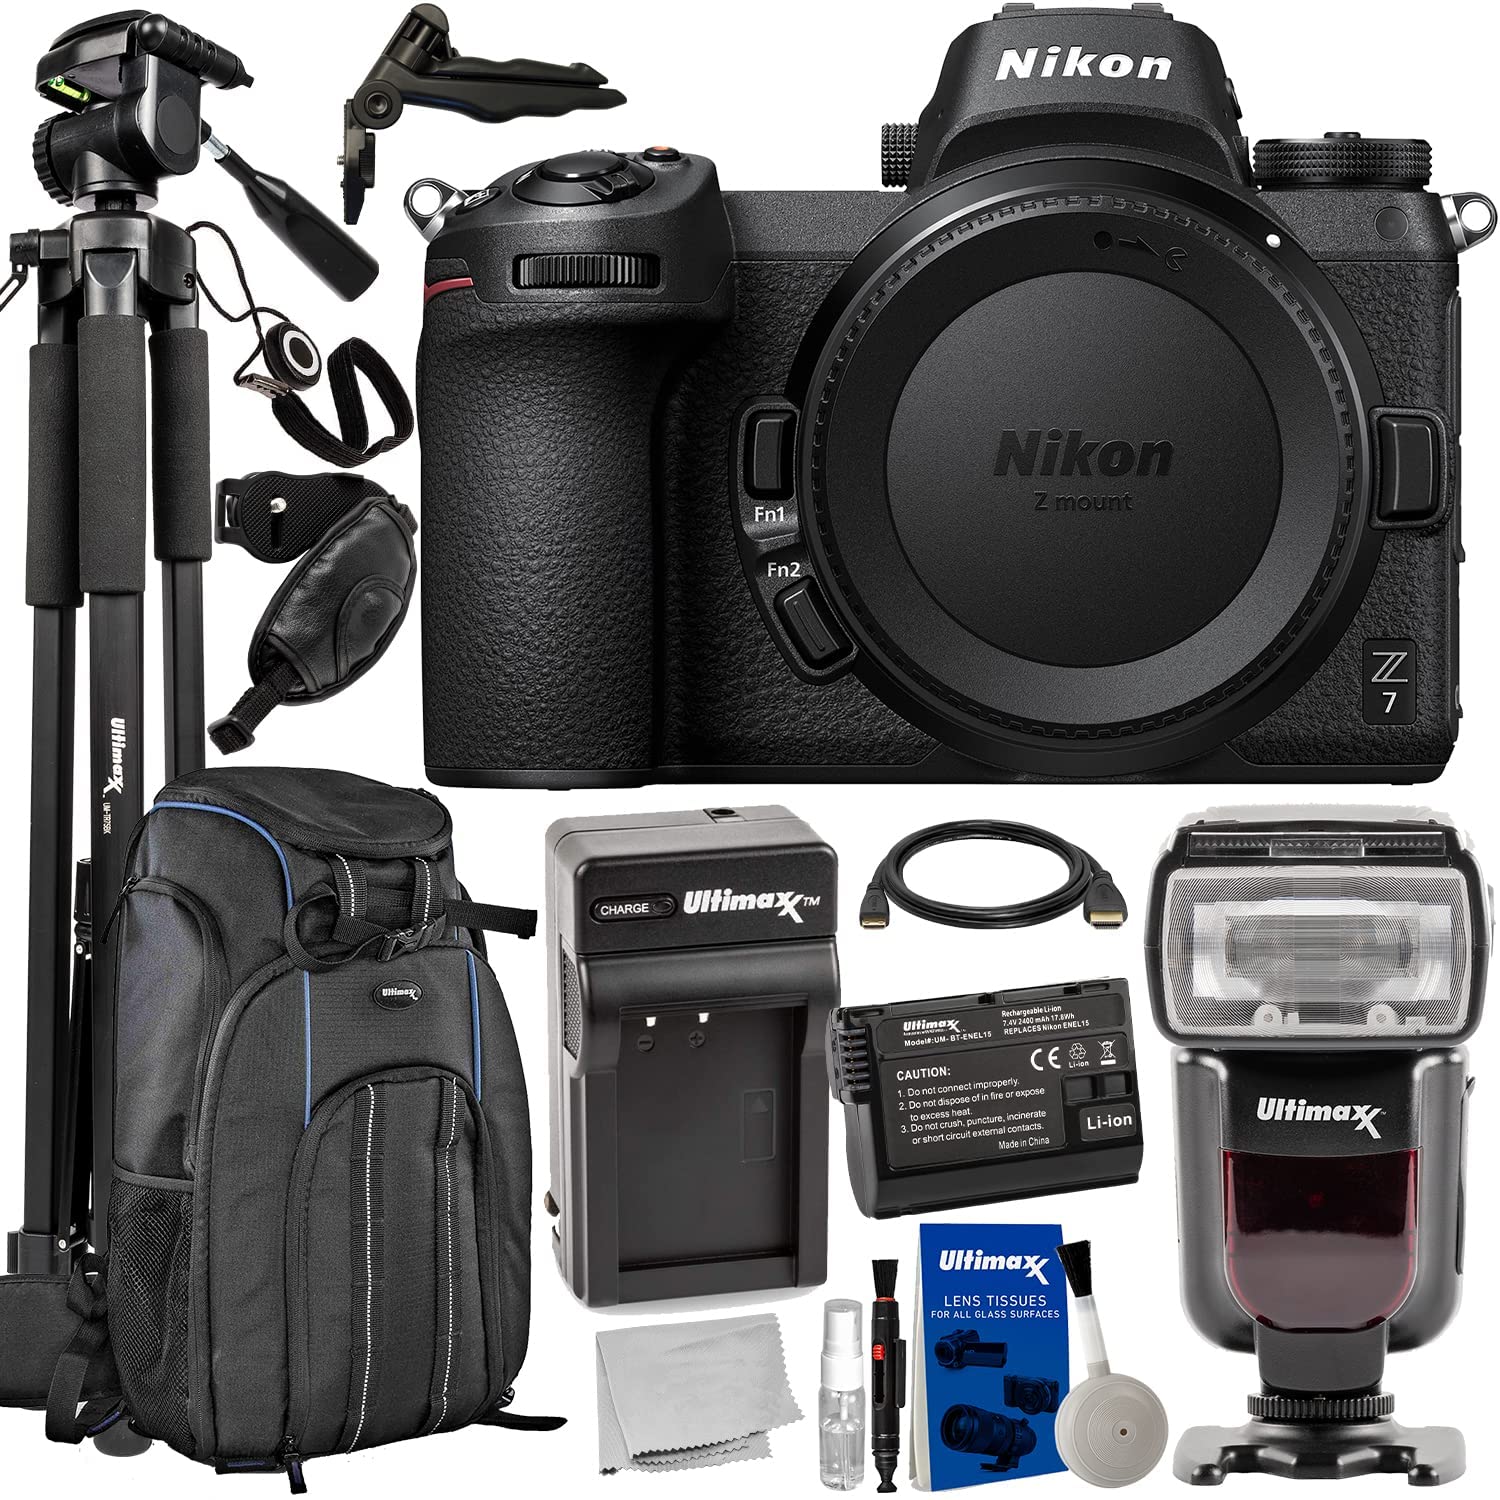 Nikon Z7 Mirrorless Camera (Body Only) + TTL Dedicated Flash for Nikon, Deluxe Camera Backpack, Extended Life Battery with Travel Charger, Lightweight 75â? Tripod & Much More (23pc Bundle)